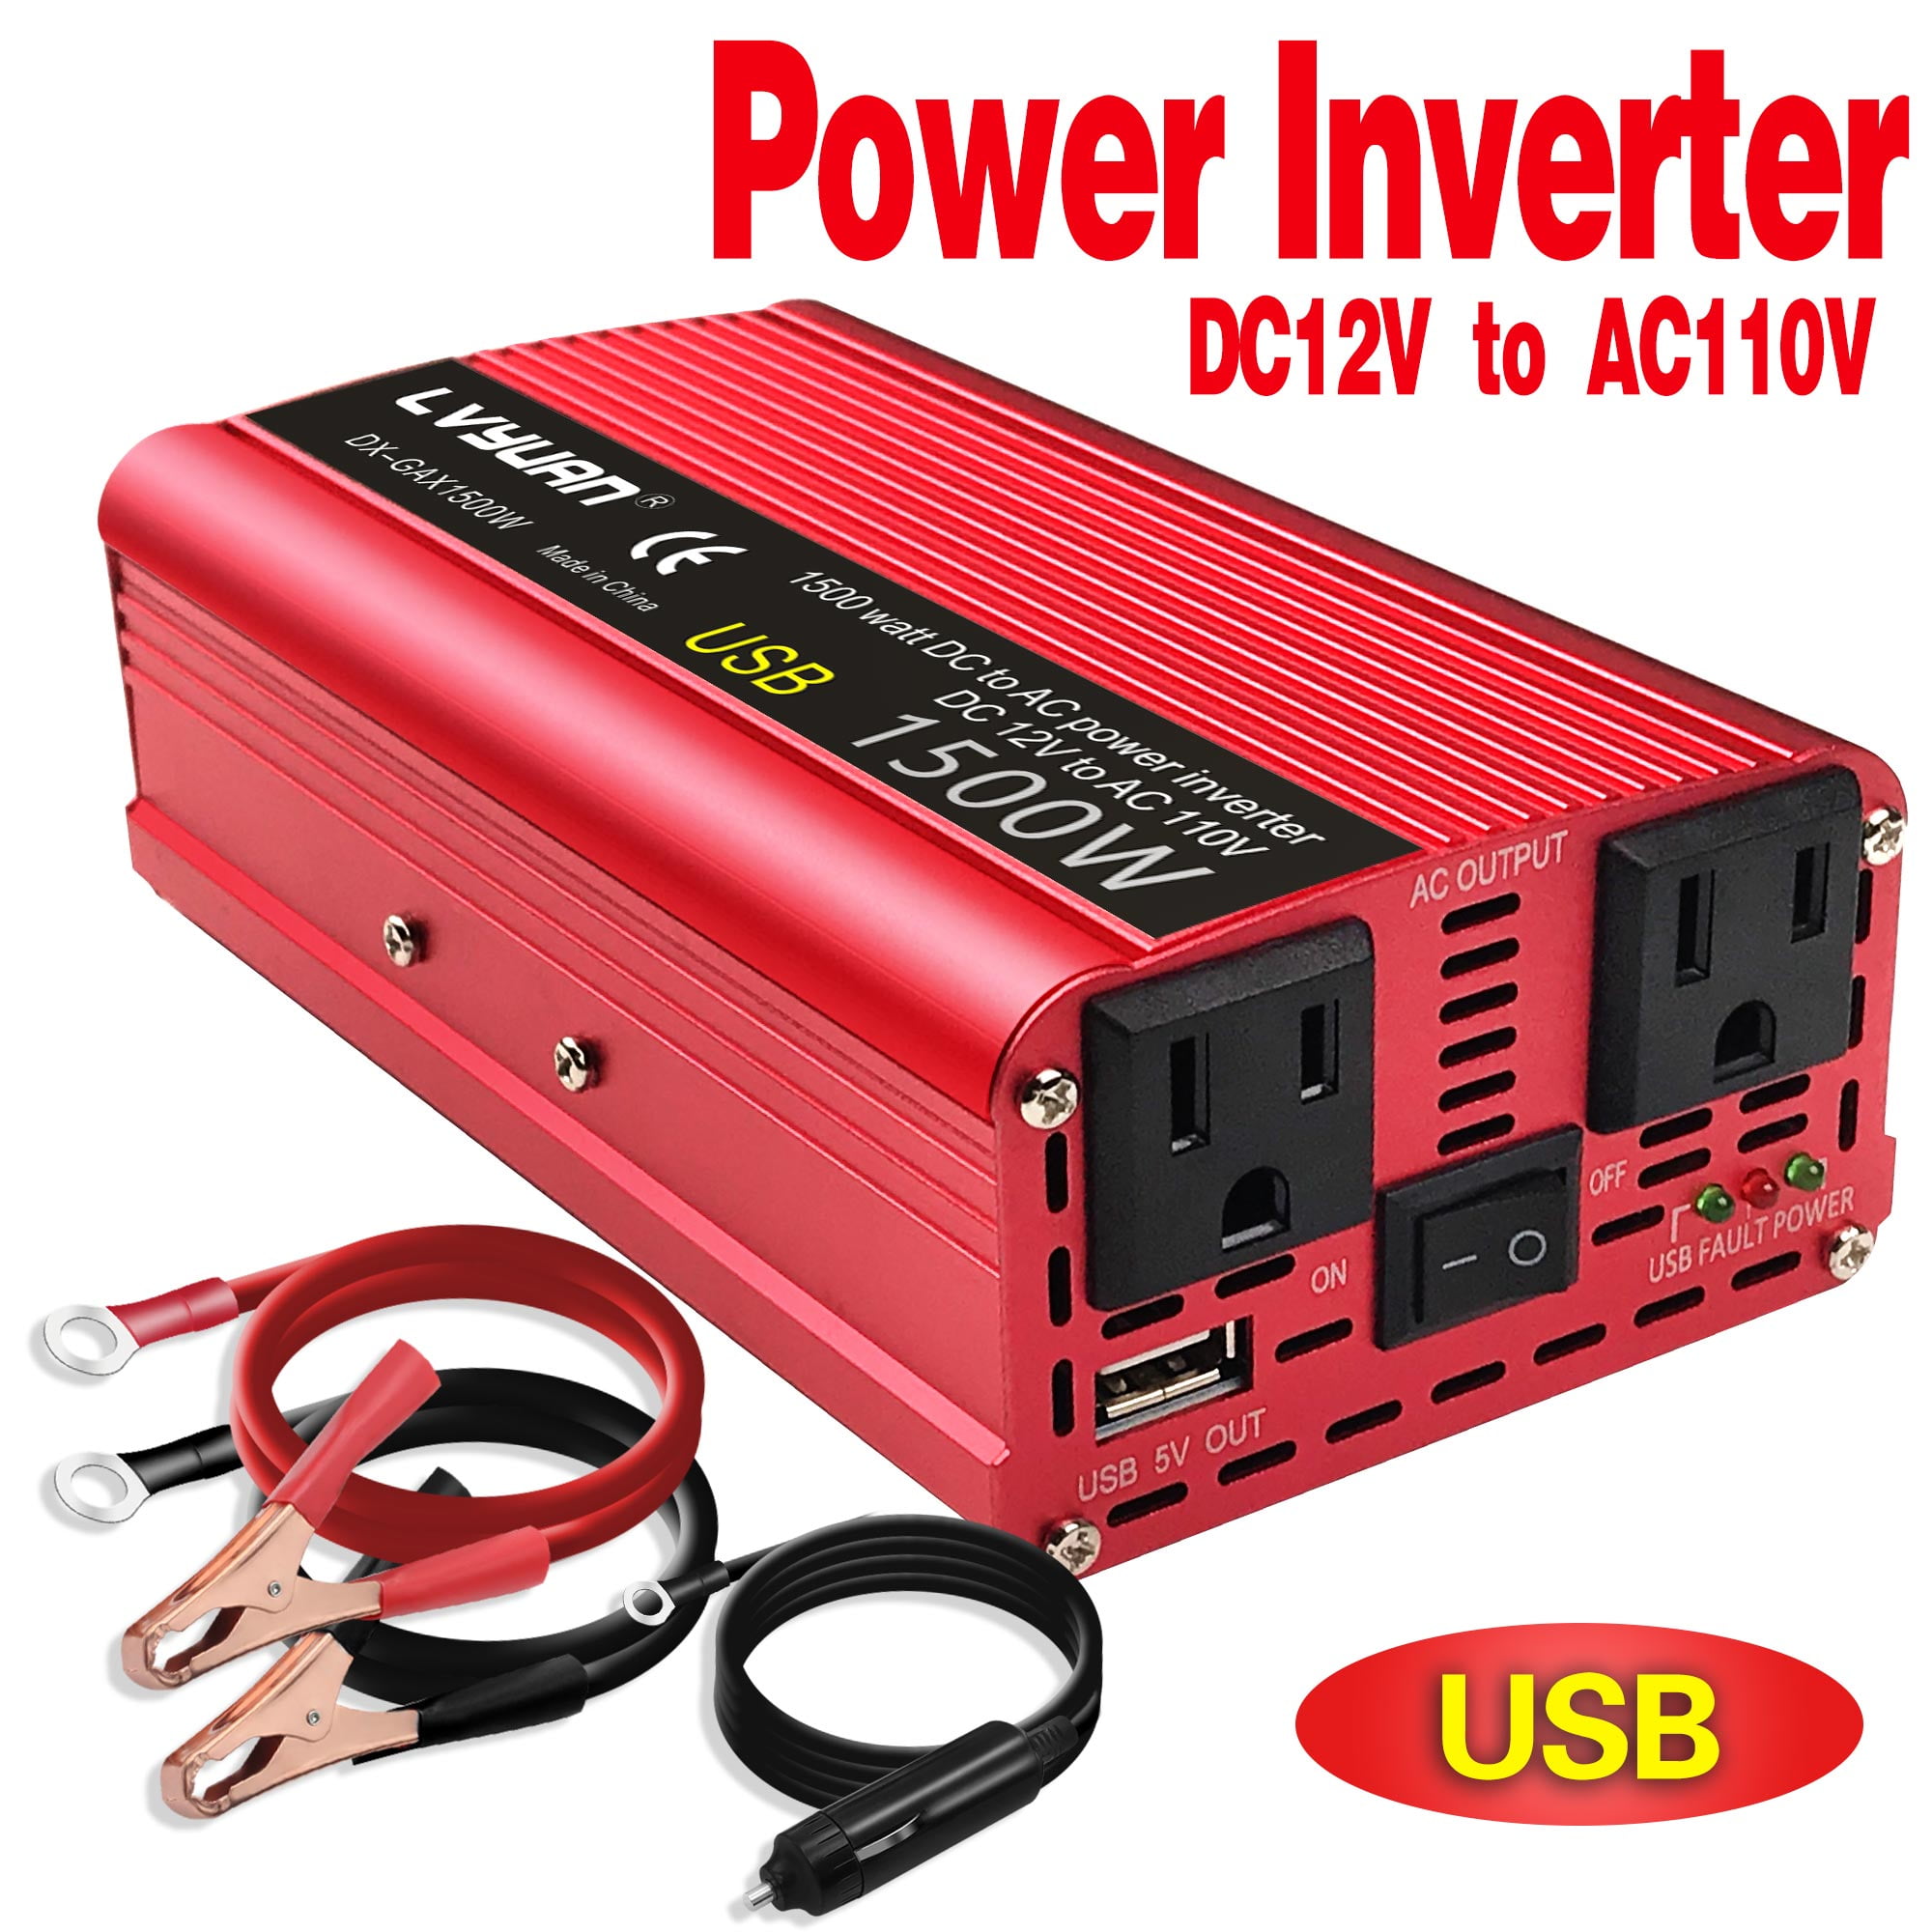 DC 12V to 110V AC with Dual AC Outlets and Dual 3.1A USB Ports for RV Caravan Truck Laptop iPad iPhone Peak Yinleader Power Inverter 1500W/3000W Red Cables+ Replaceable Fuses 